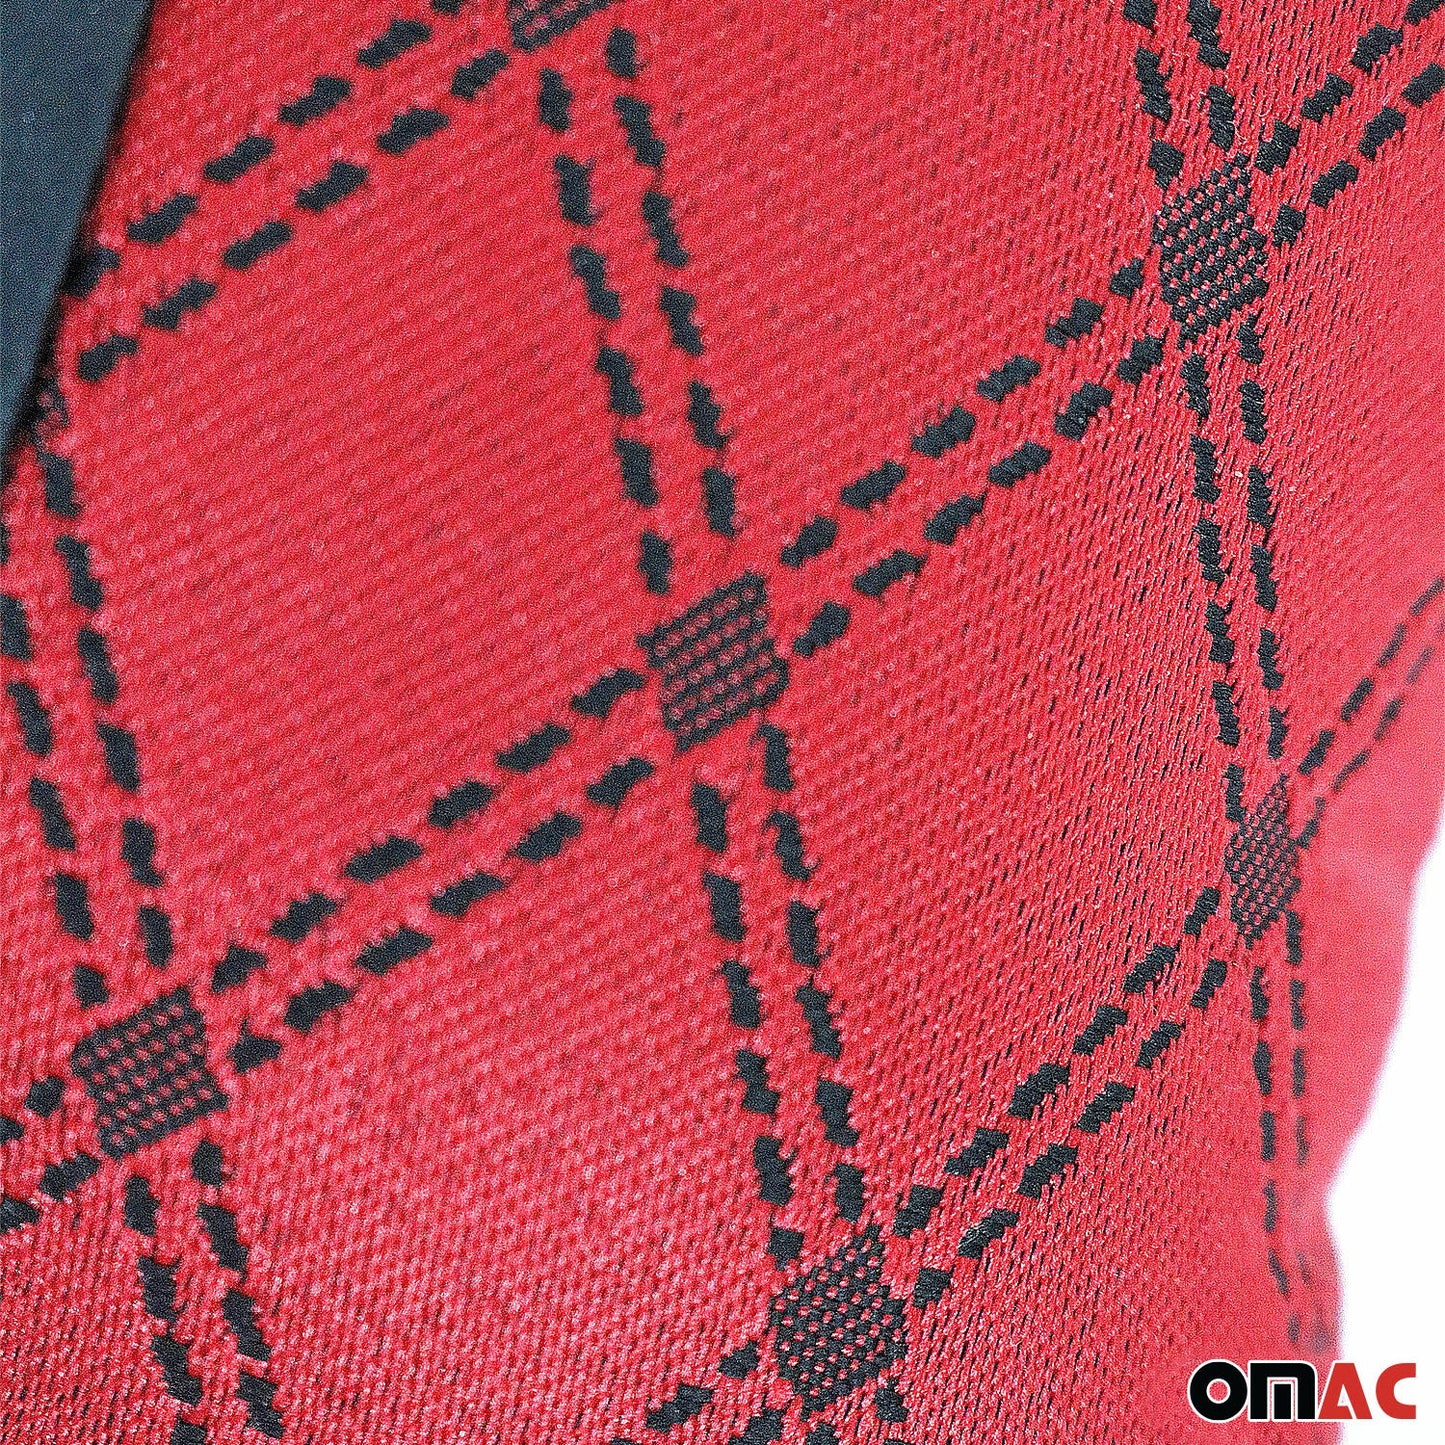 OMAC 1x Car Seat Neck Pillow Head Shoulder Rest Pad Fabric PU Leather Red with Black 96312-KS1